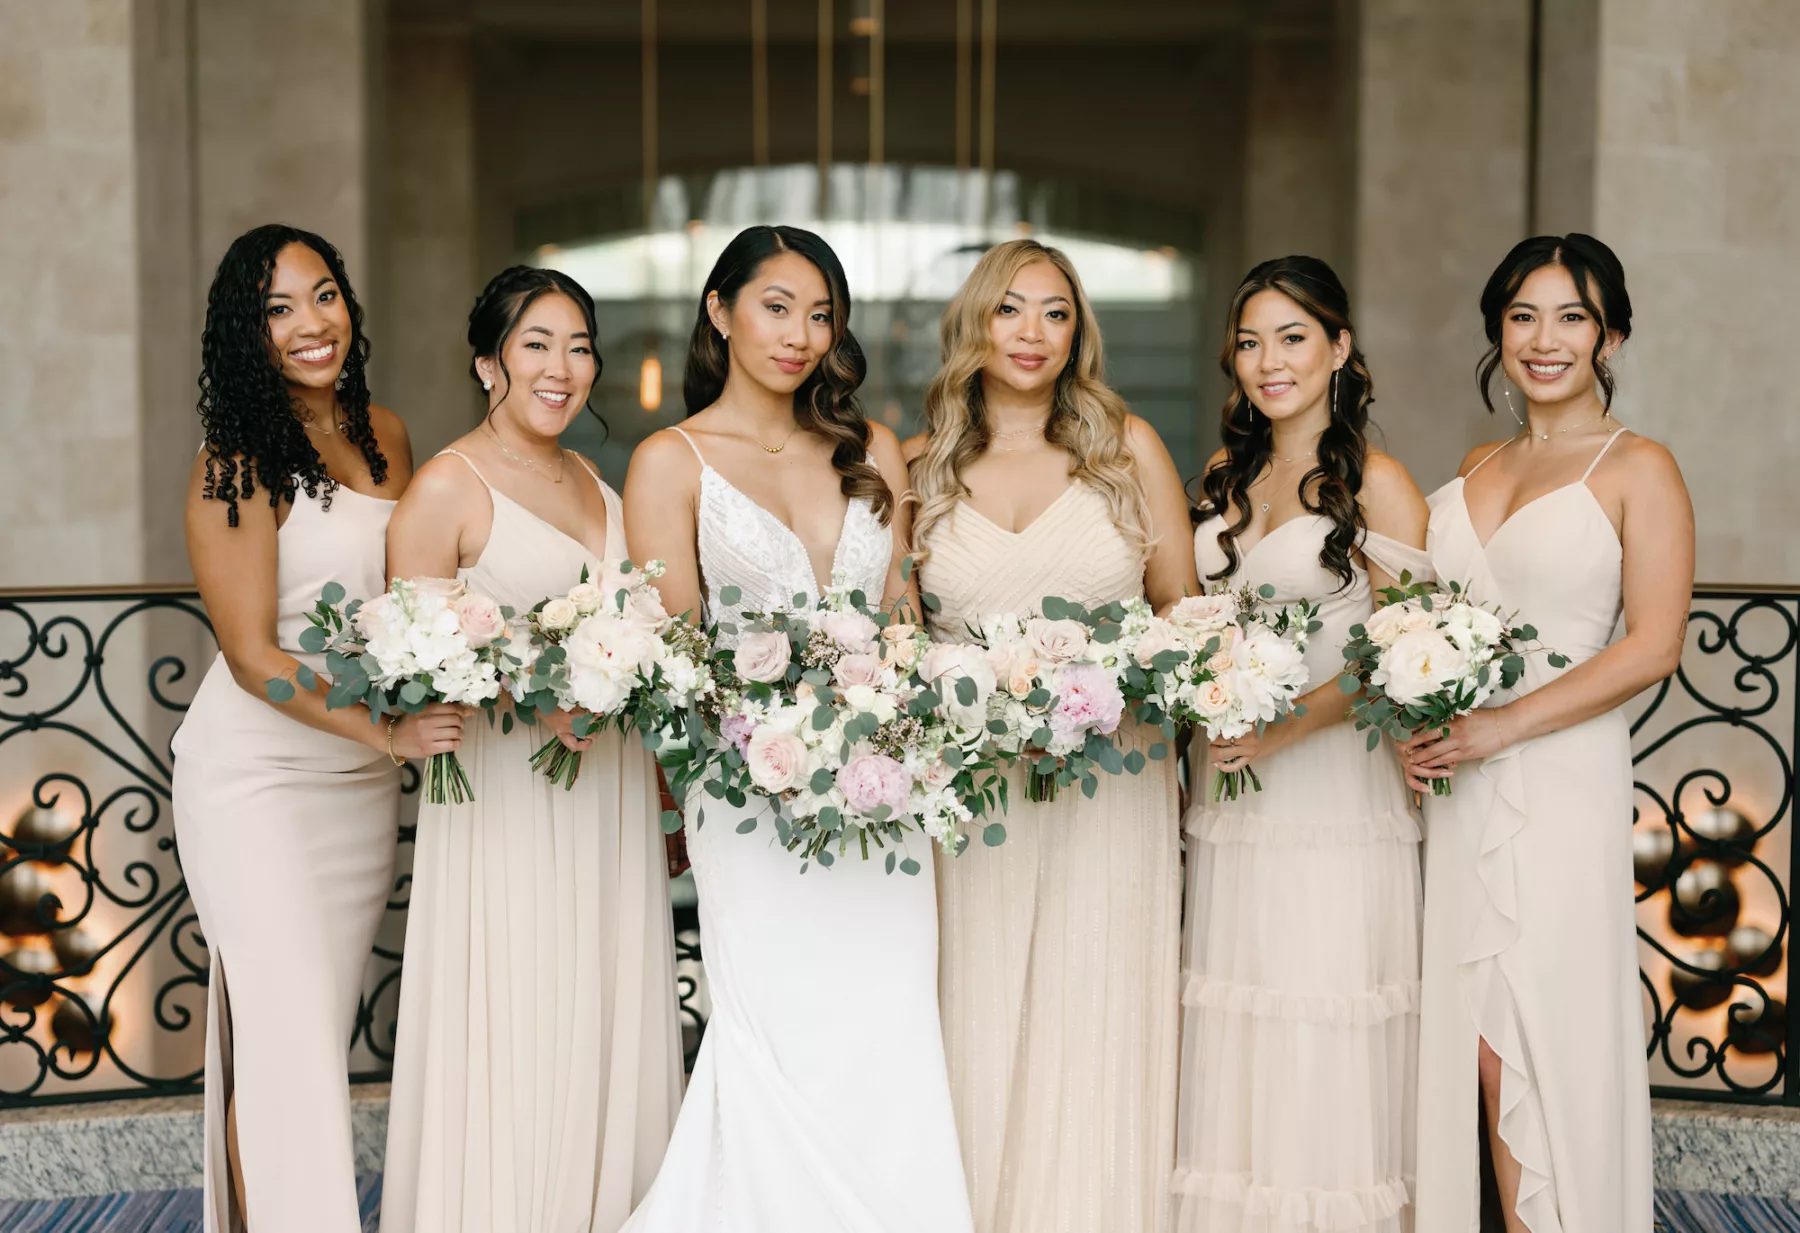 Spring Wedding Bouquet Inspiration with White Roses, Pink Garden Roses, Wax Flowers, Peony, and Greenery | Neutral Cream Mismatched Bridesmaid Dress Ideas | Romantic Bridal Hair and Makeup | Tampa Bay Florist Marigold Flower Co | Hair and Makeup Artist Femme Akoi Beauty Studio